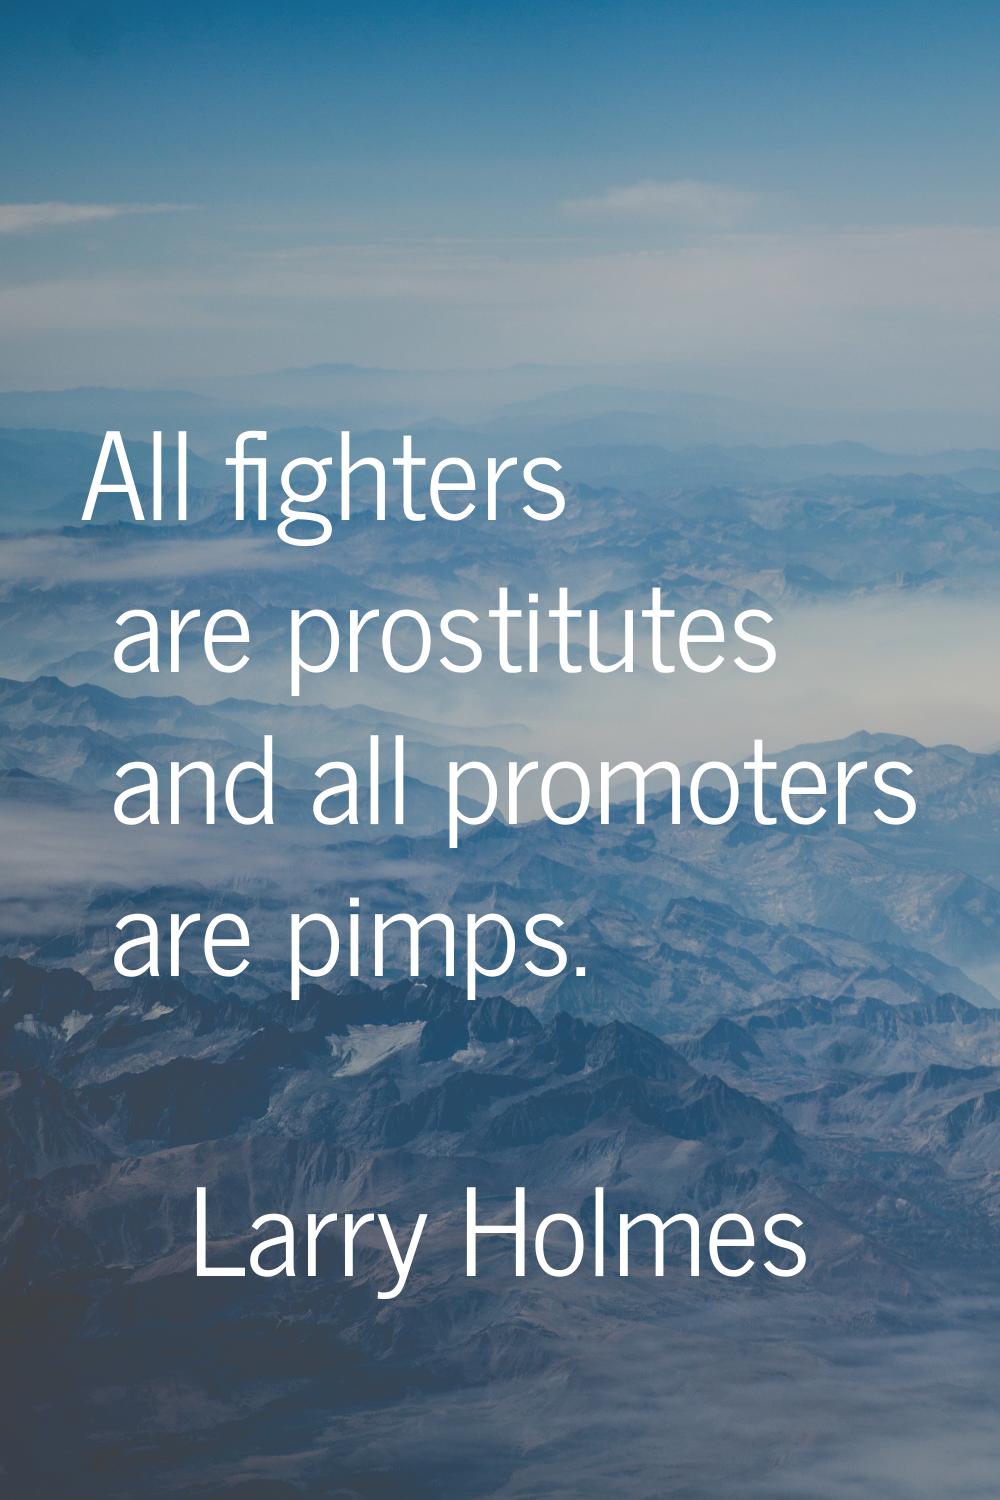 All fighters are prostitutes and all promoters are pimps.